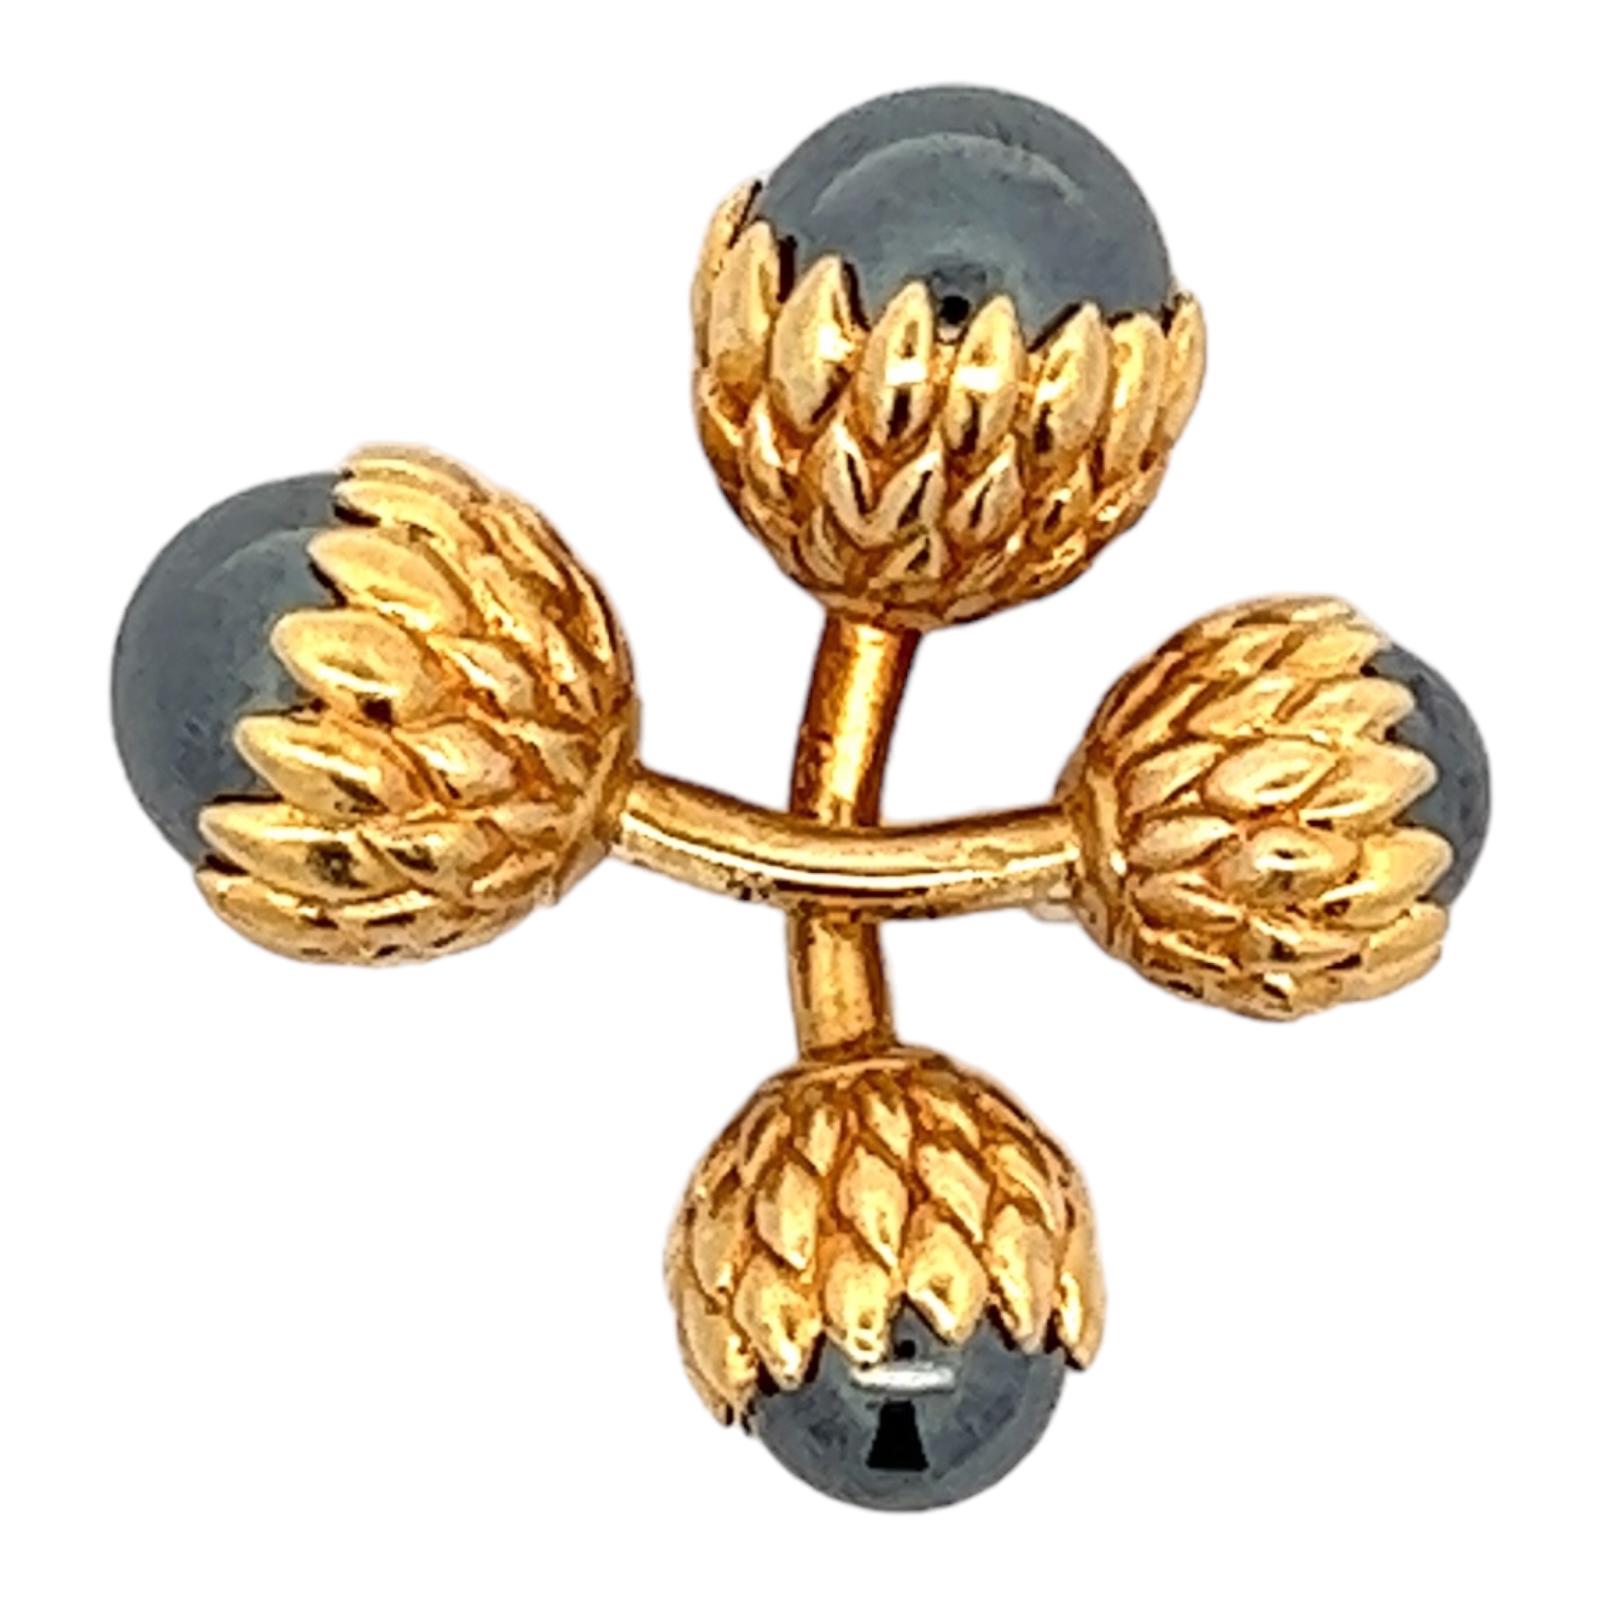 Tiffany & Co. hematite cufflinks fashioned in 18 karat yellow gold. The timeless cufflinks feature hematite gemstones set in textured yellow gold acorn designs. The cufflinks measure 1.25 inches in length, and 10.5mm in width at the ends; signed